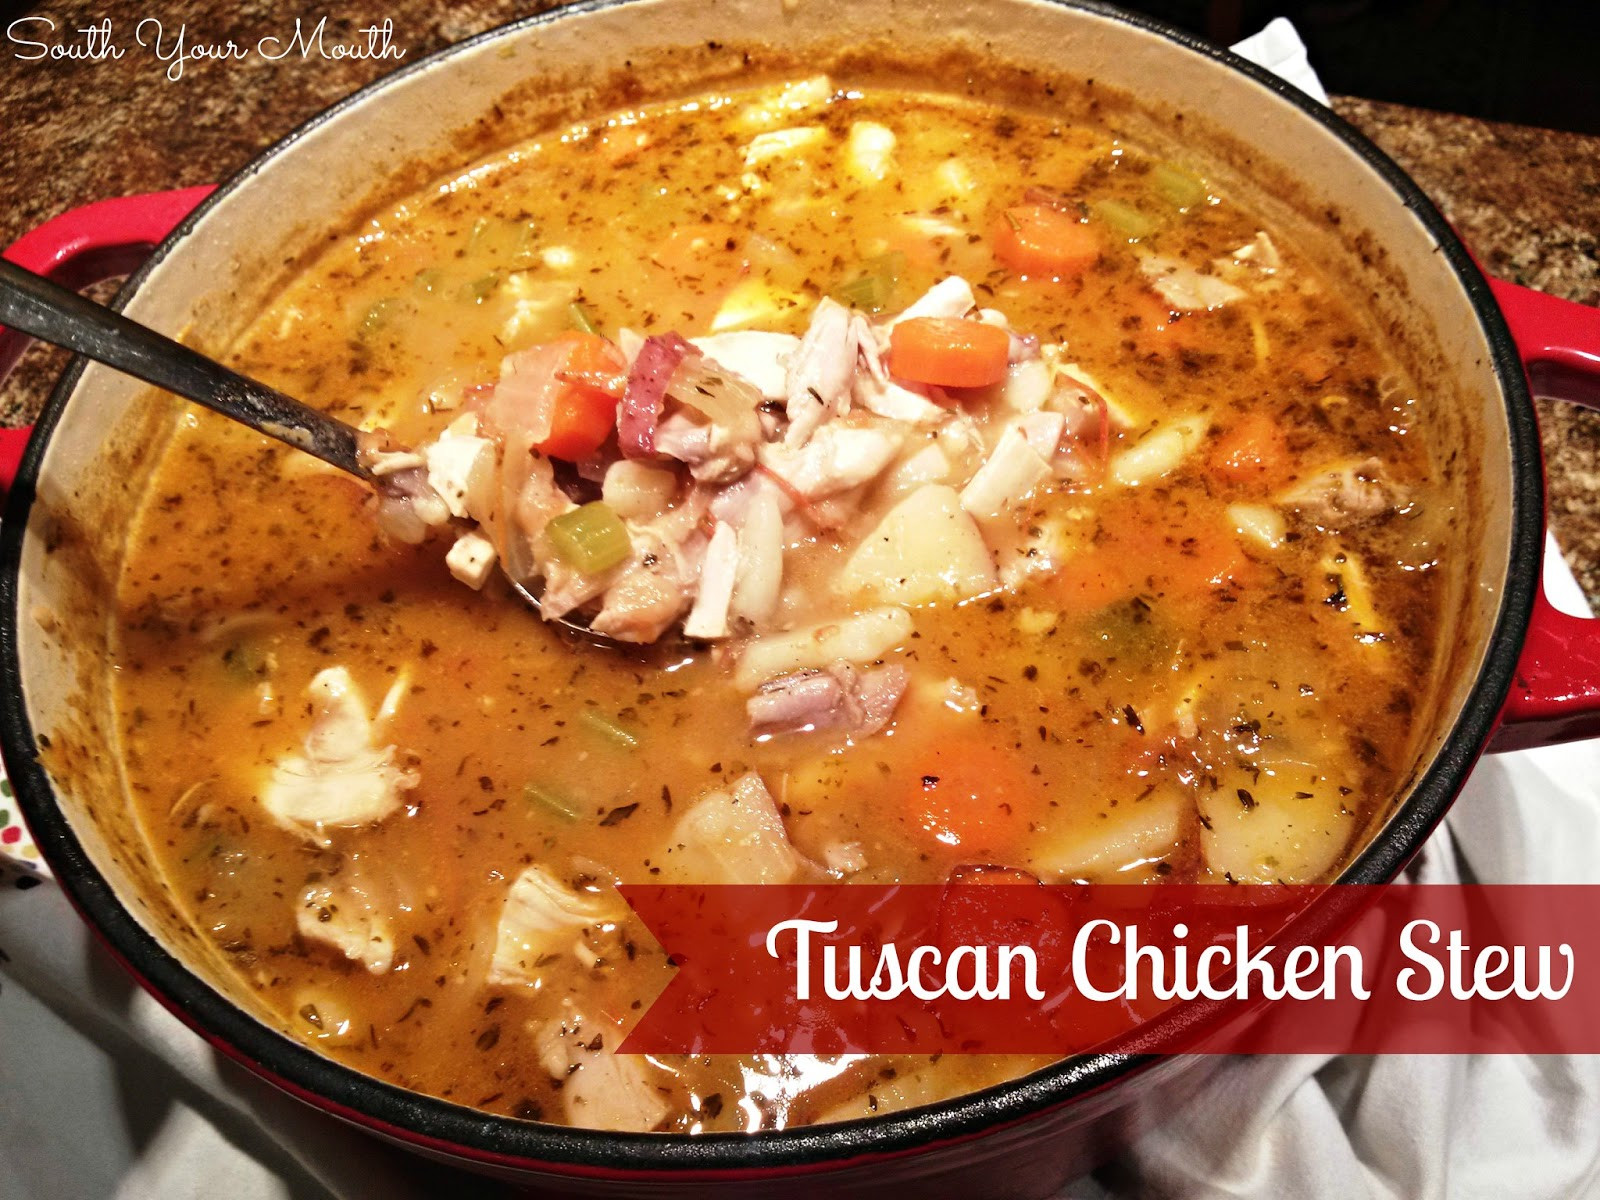 Italian Chicken Stew
 South Your Mouth Tuscan Chicken Stew